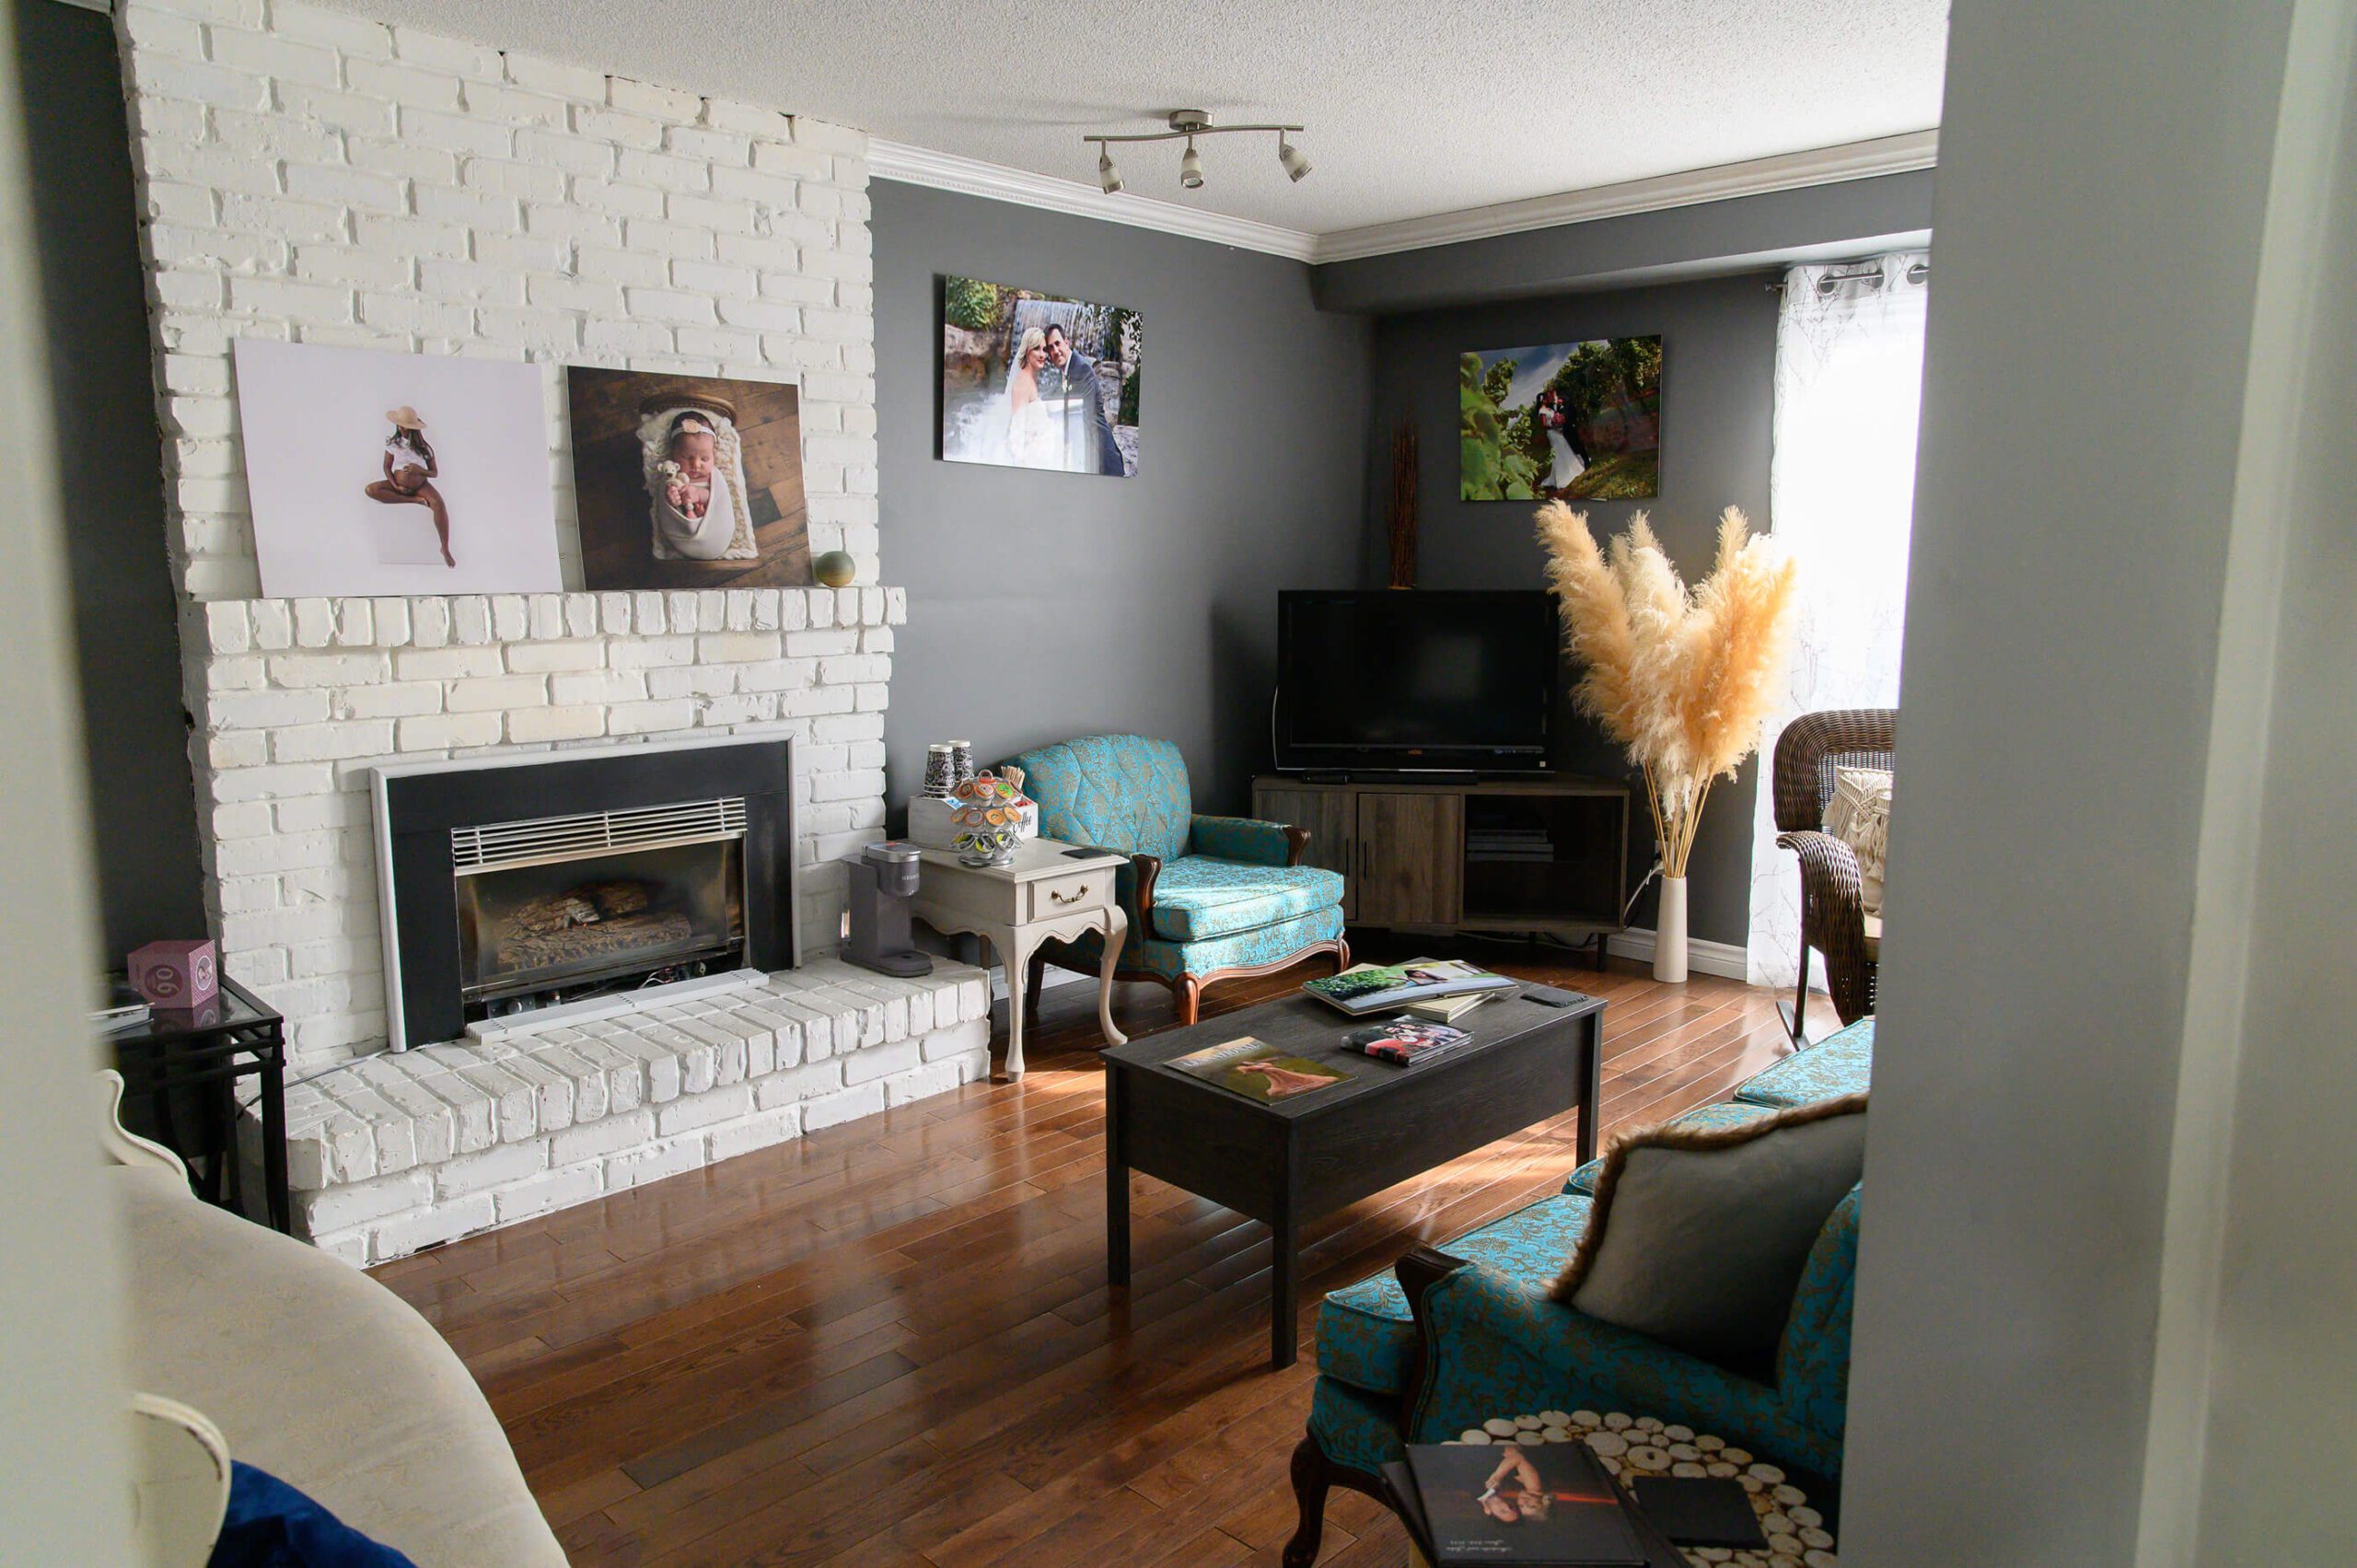 Burlington, Ontario Client sitting room in the Gibson Photography studio space